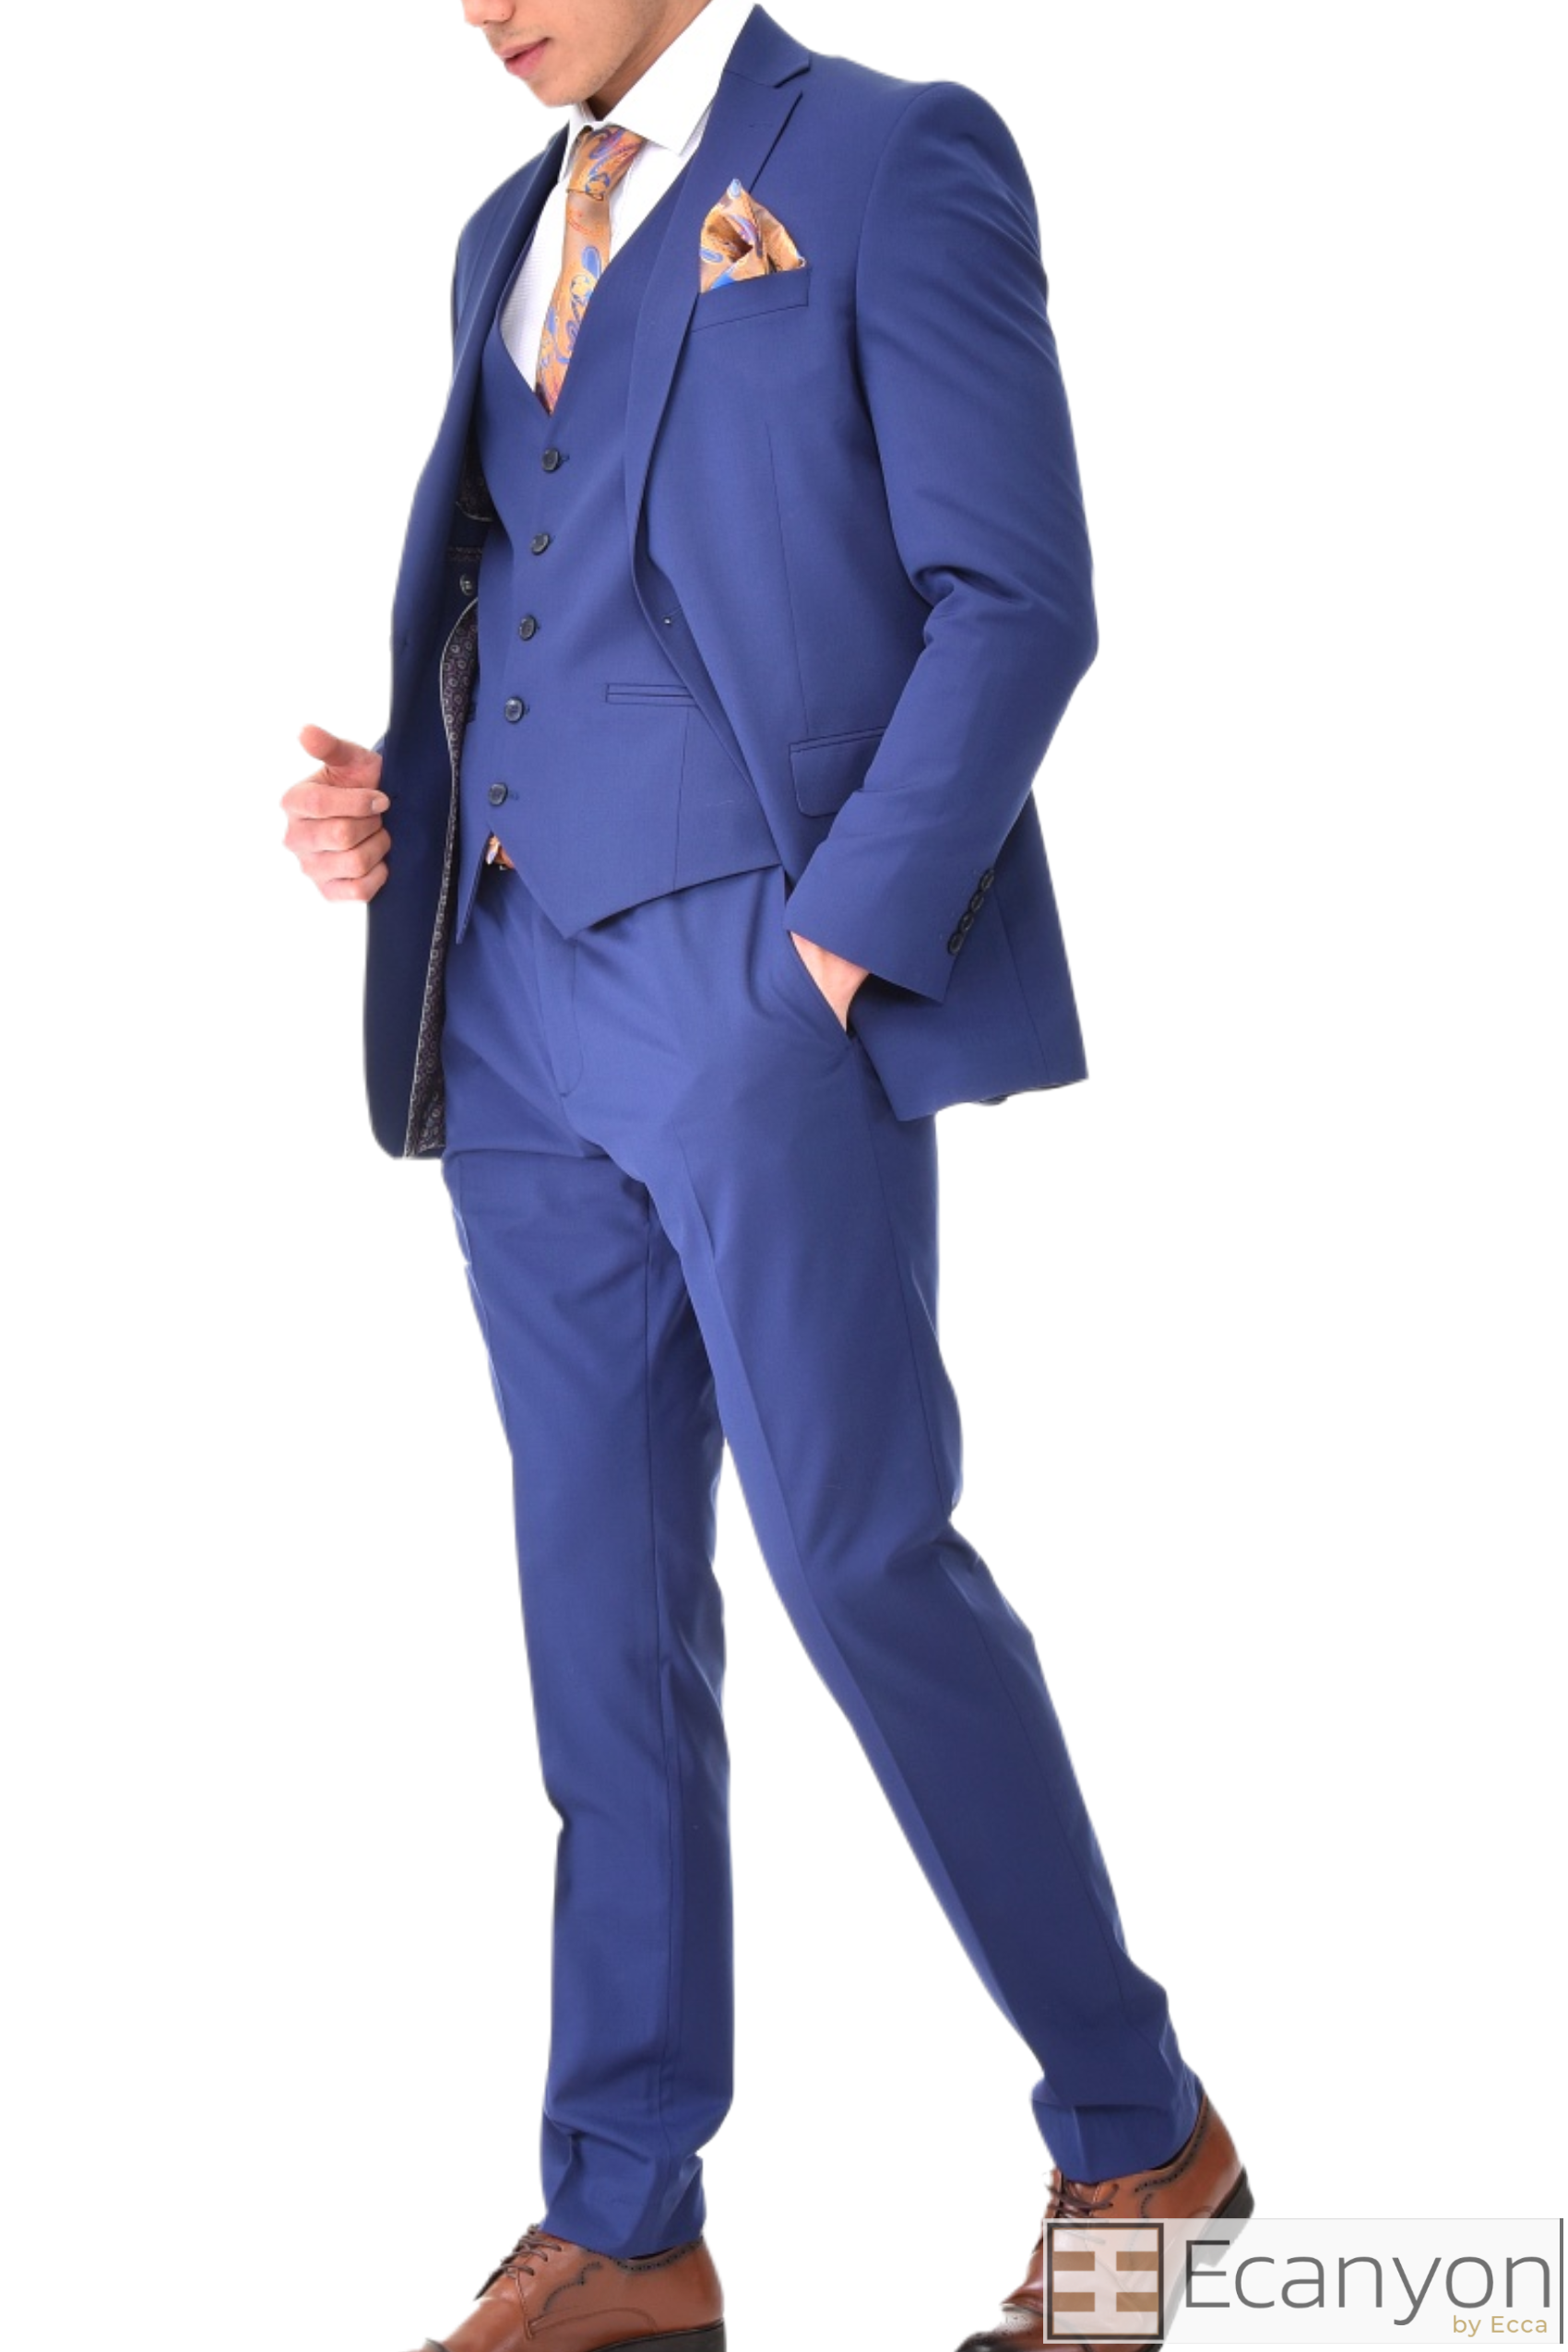 Royal Blue Plain Three Piece Suit, A timeless a plain royal blue three piece suits that can be styled up for special events or styled down for the office. The matching quality a plain royal blue waistcoat and trousers are paired with a plain royal blue suit jacket. You’ll love the patterned lining panels on this suit, especially the one in the jacket’s breast pocket which doubles up as a pocket square. Master Tailored Fit 3 Piece Suit